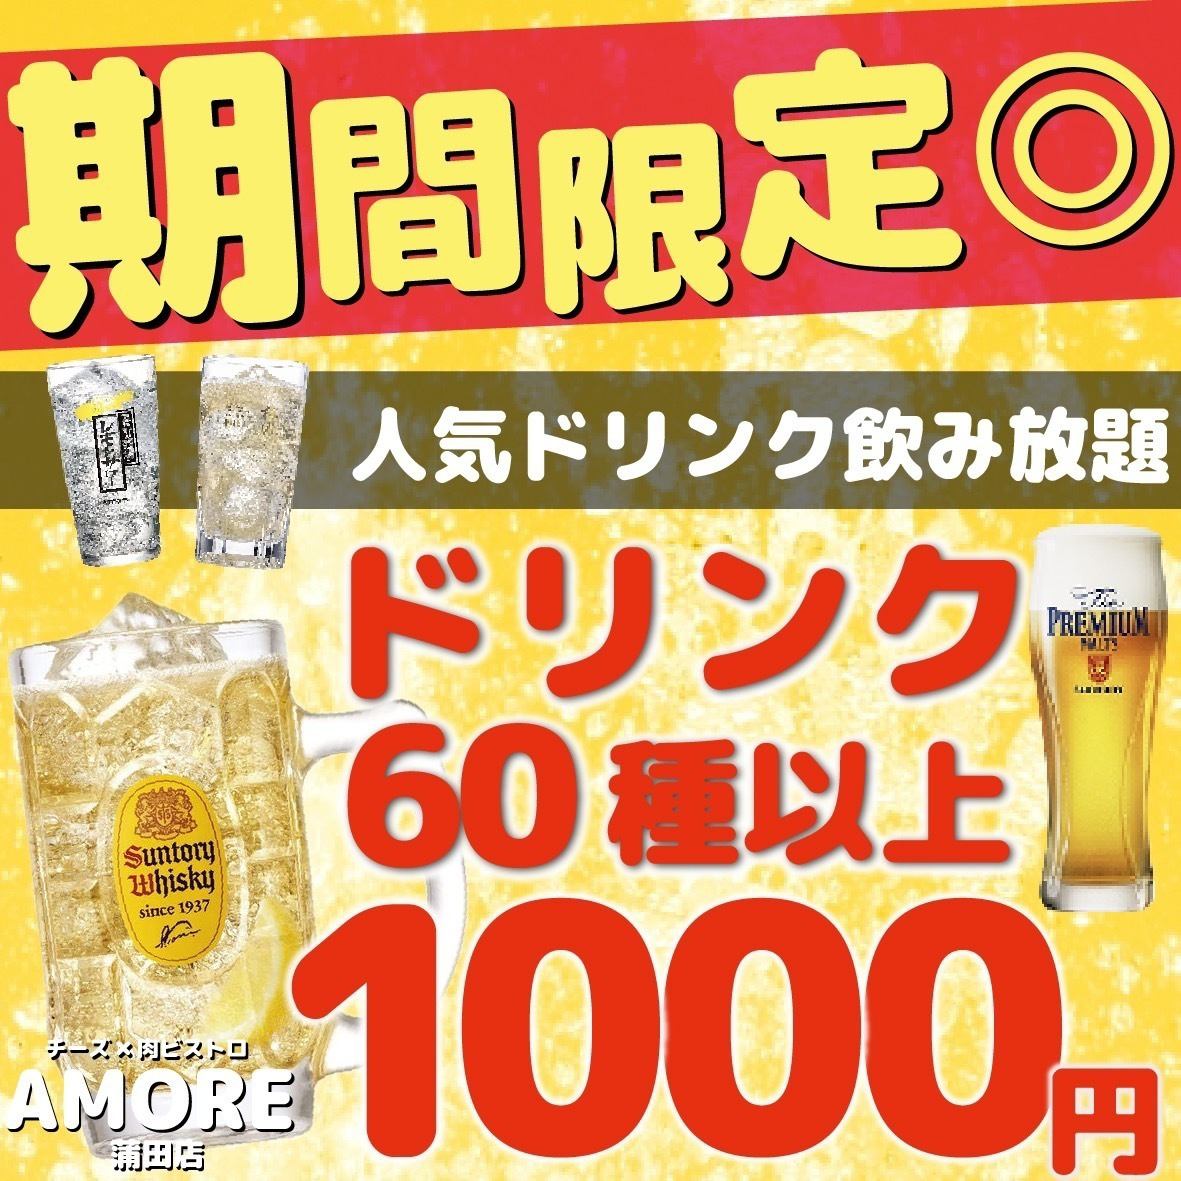 [Great value♪] All-you-can-drink 60 types of drinks for 2 hours 1980 yen → 980 yen